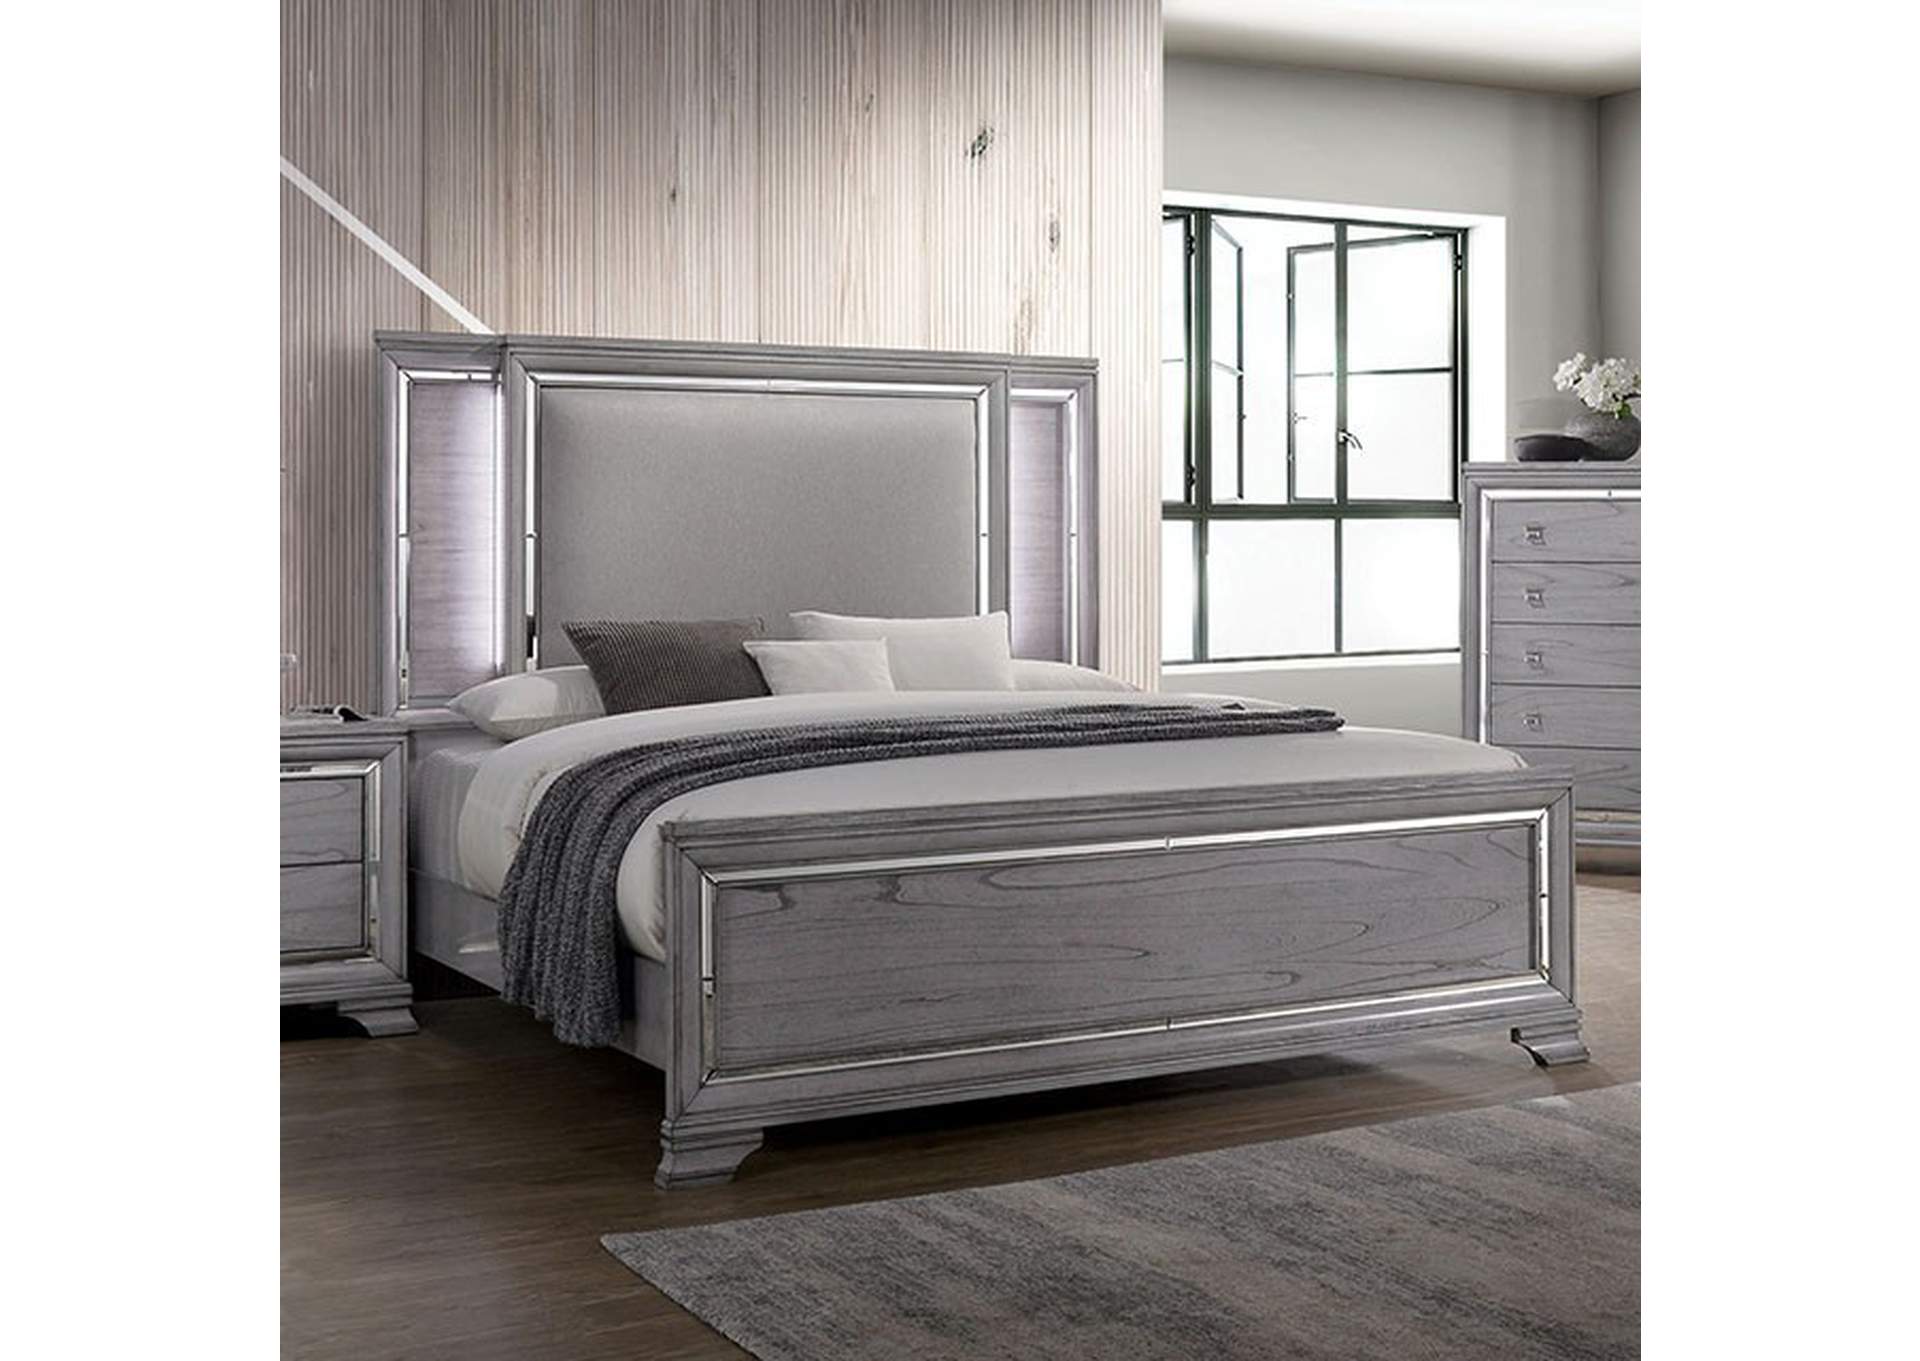 Alanis Light Gray Queen Bed,Furniture of America